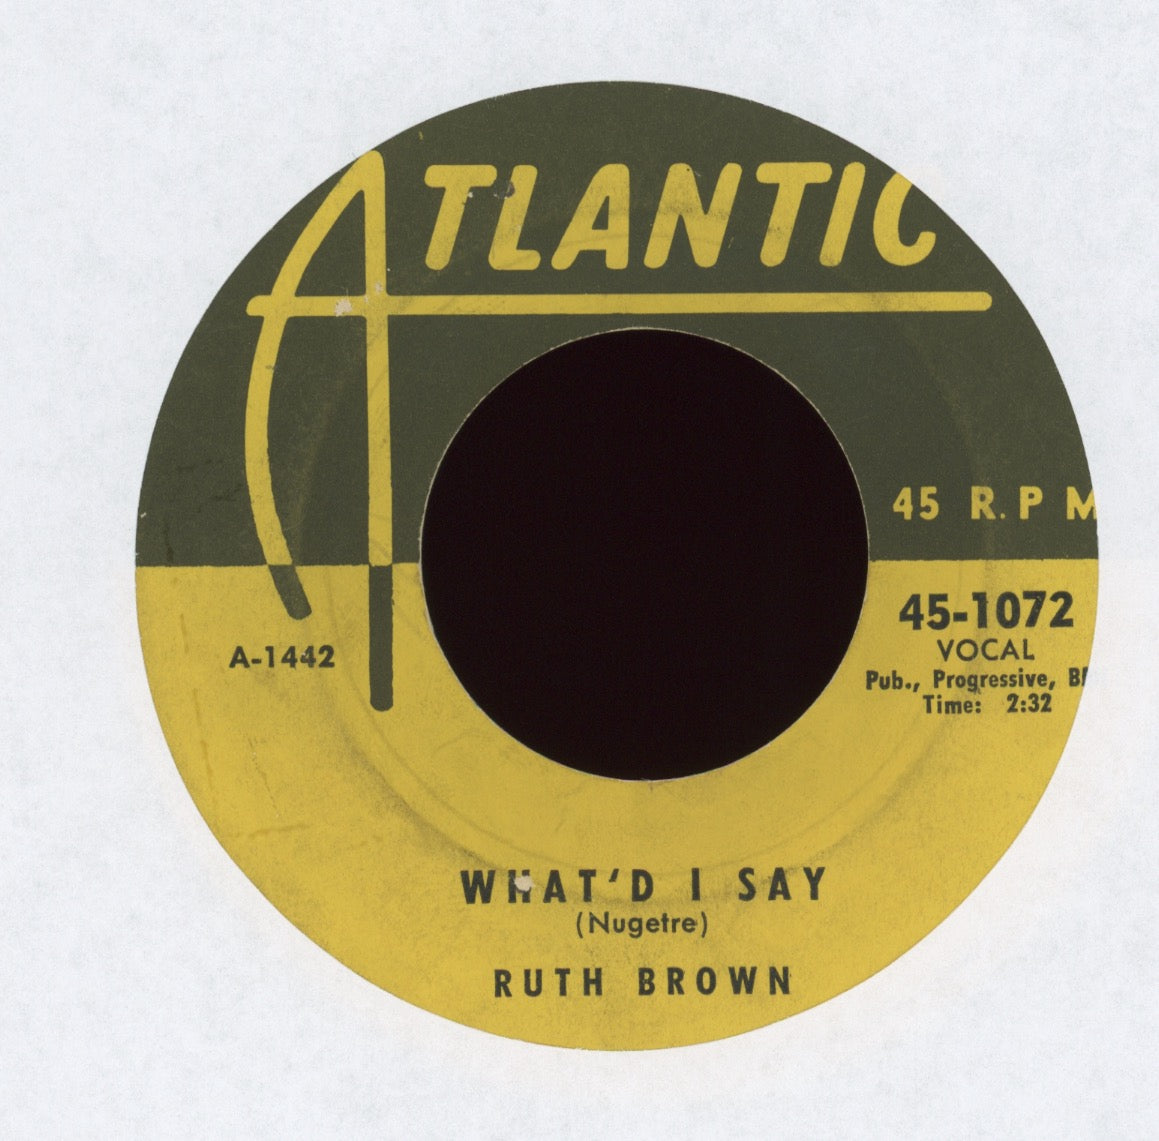 Ruth Brown - It's Love Baby (24 Hours Of The Day) / What'd I Say on Atlantic